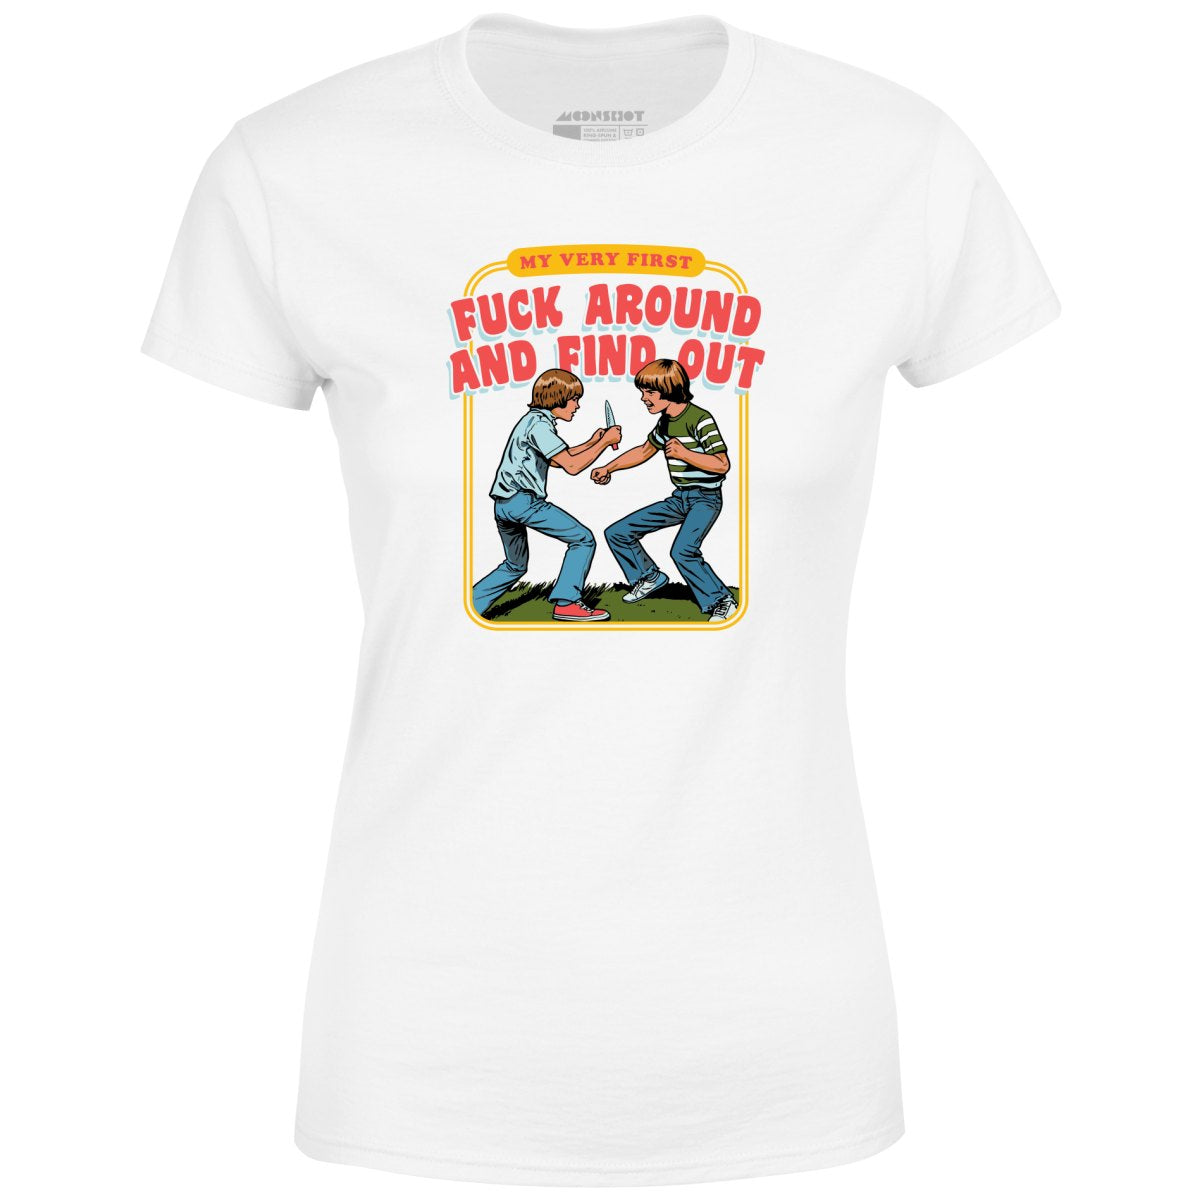 My Very First Fuck Around and Find Out - Women's T-Shirt